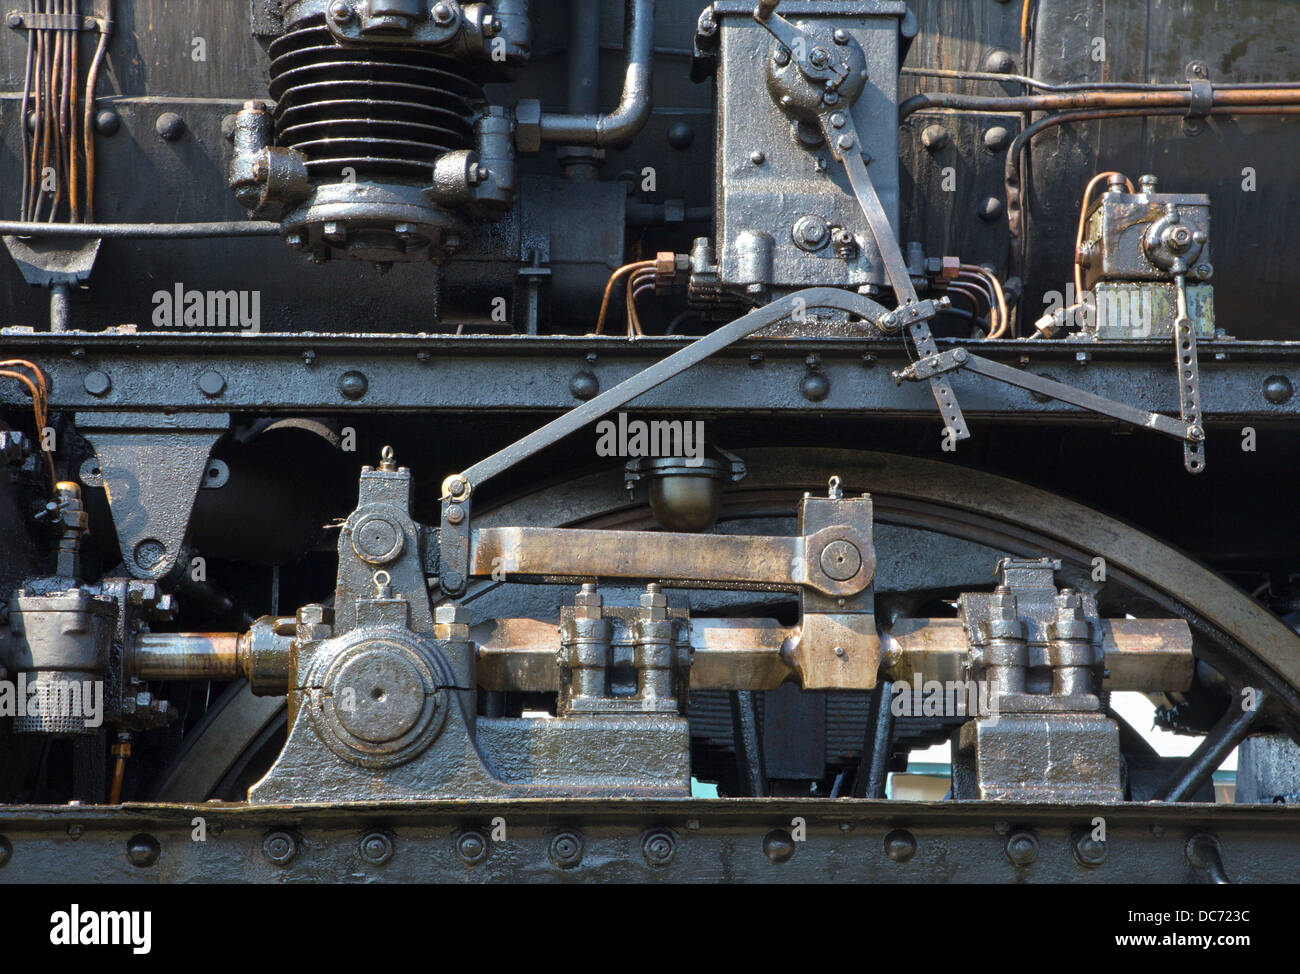 detail of old steam locomotive Stock Photo